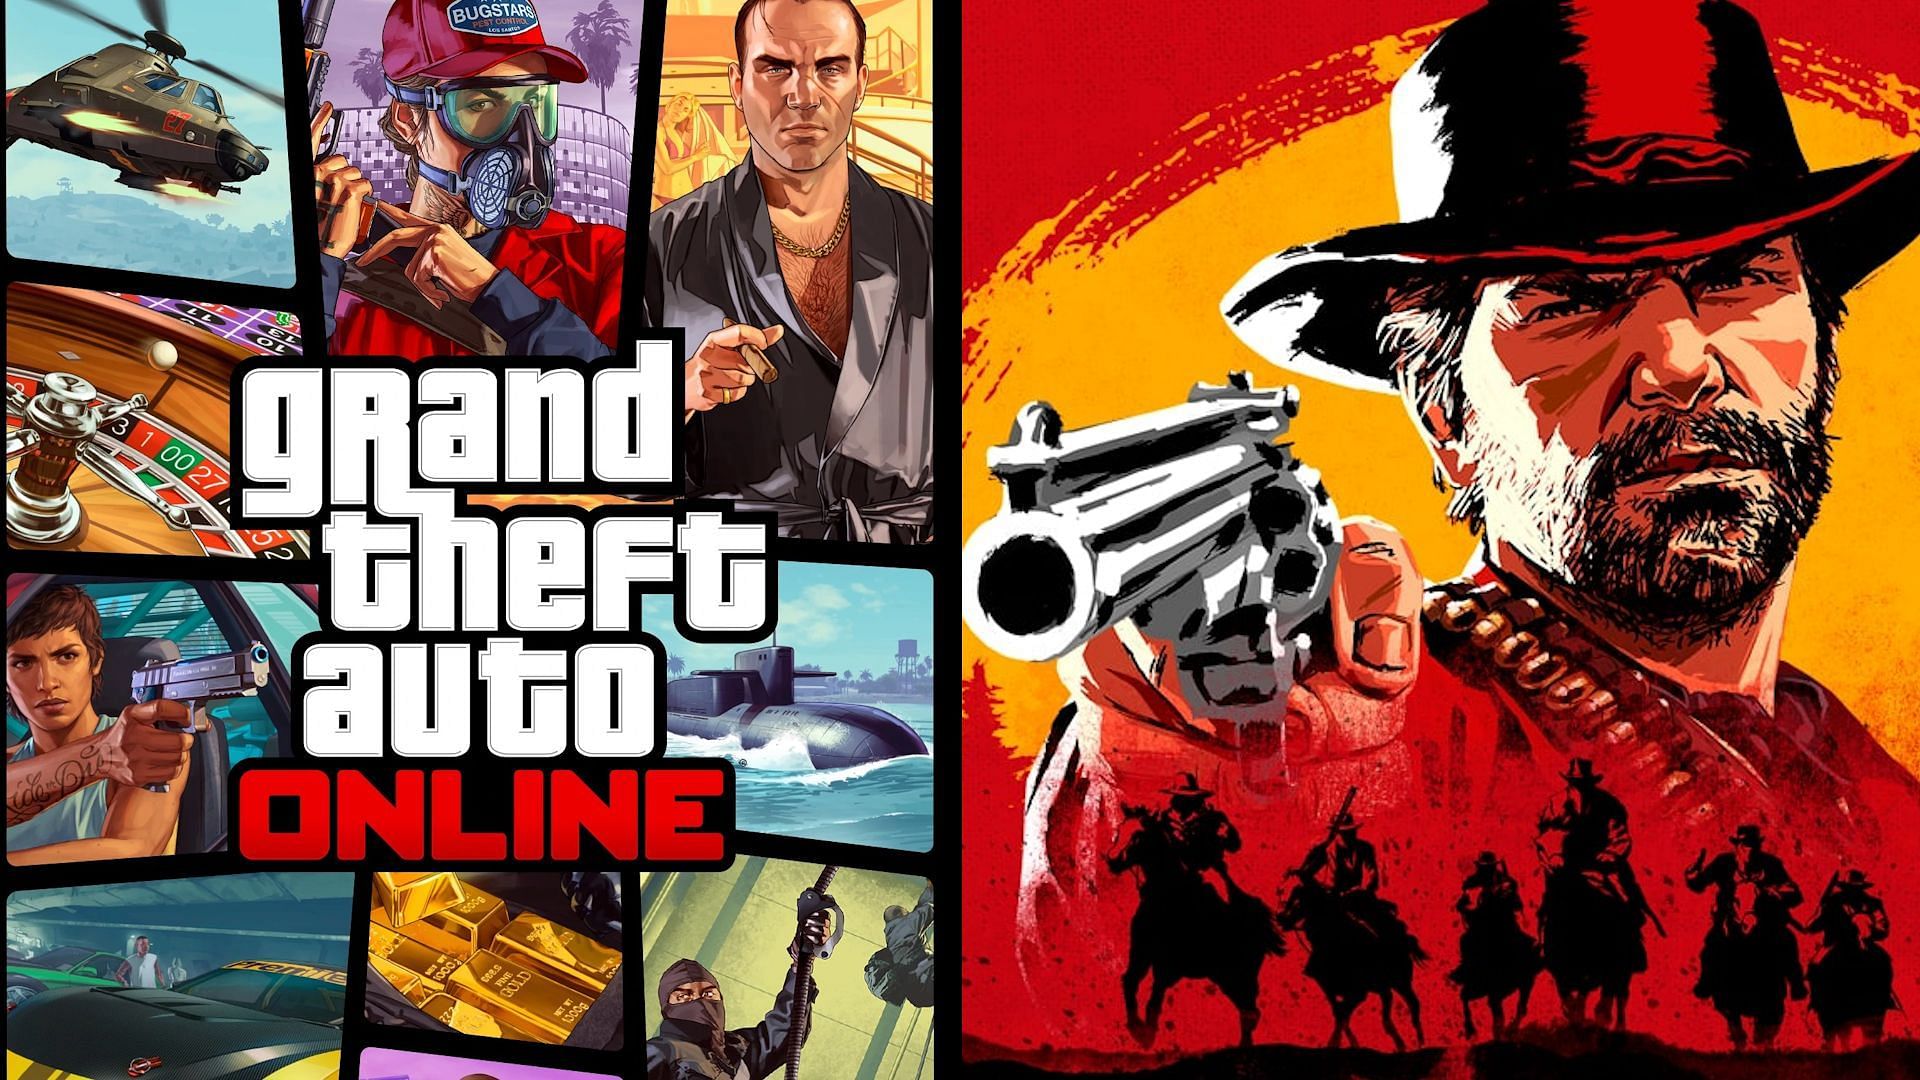 GTA Online and Red Dead Redemption 2 will be undergoing maintenance soon